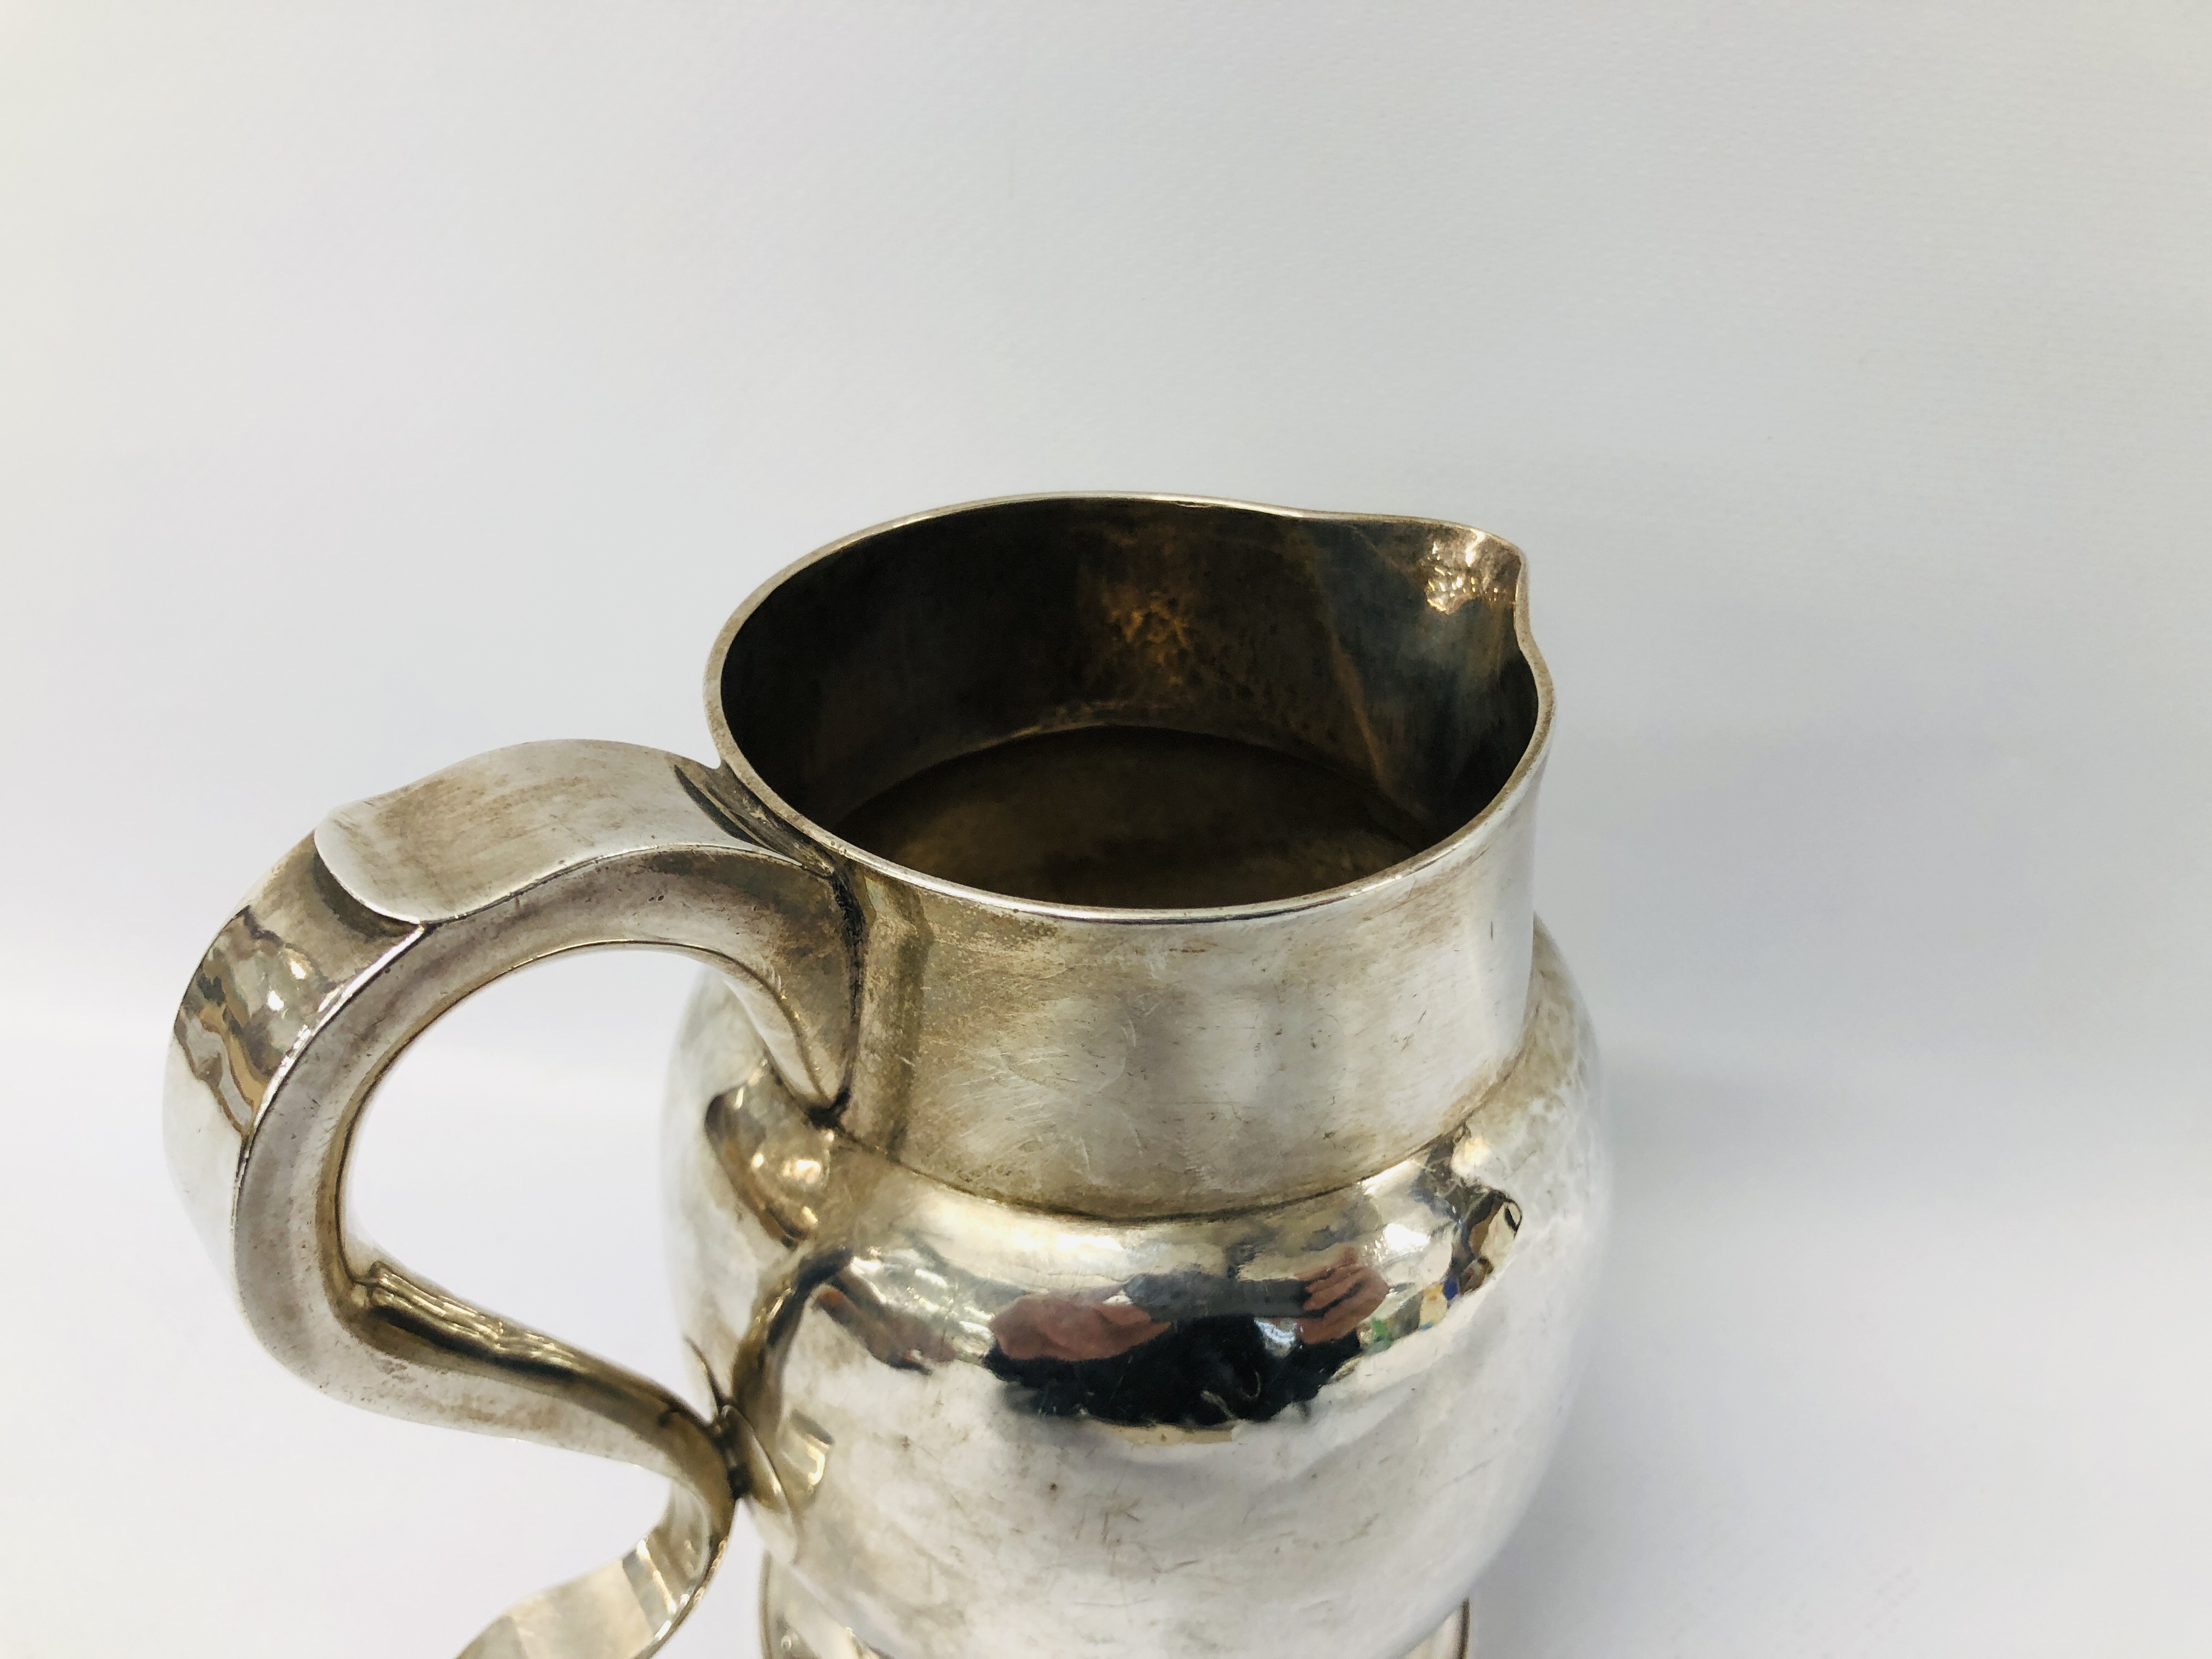 A GEORGE III SILVER JUG, THE 'S' SHAPED HANDLE ON A PLAIN BULBOUS BODY, NEWCASTLE 1790, J. - Image 8 of 21